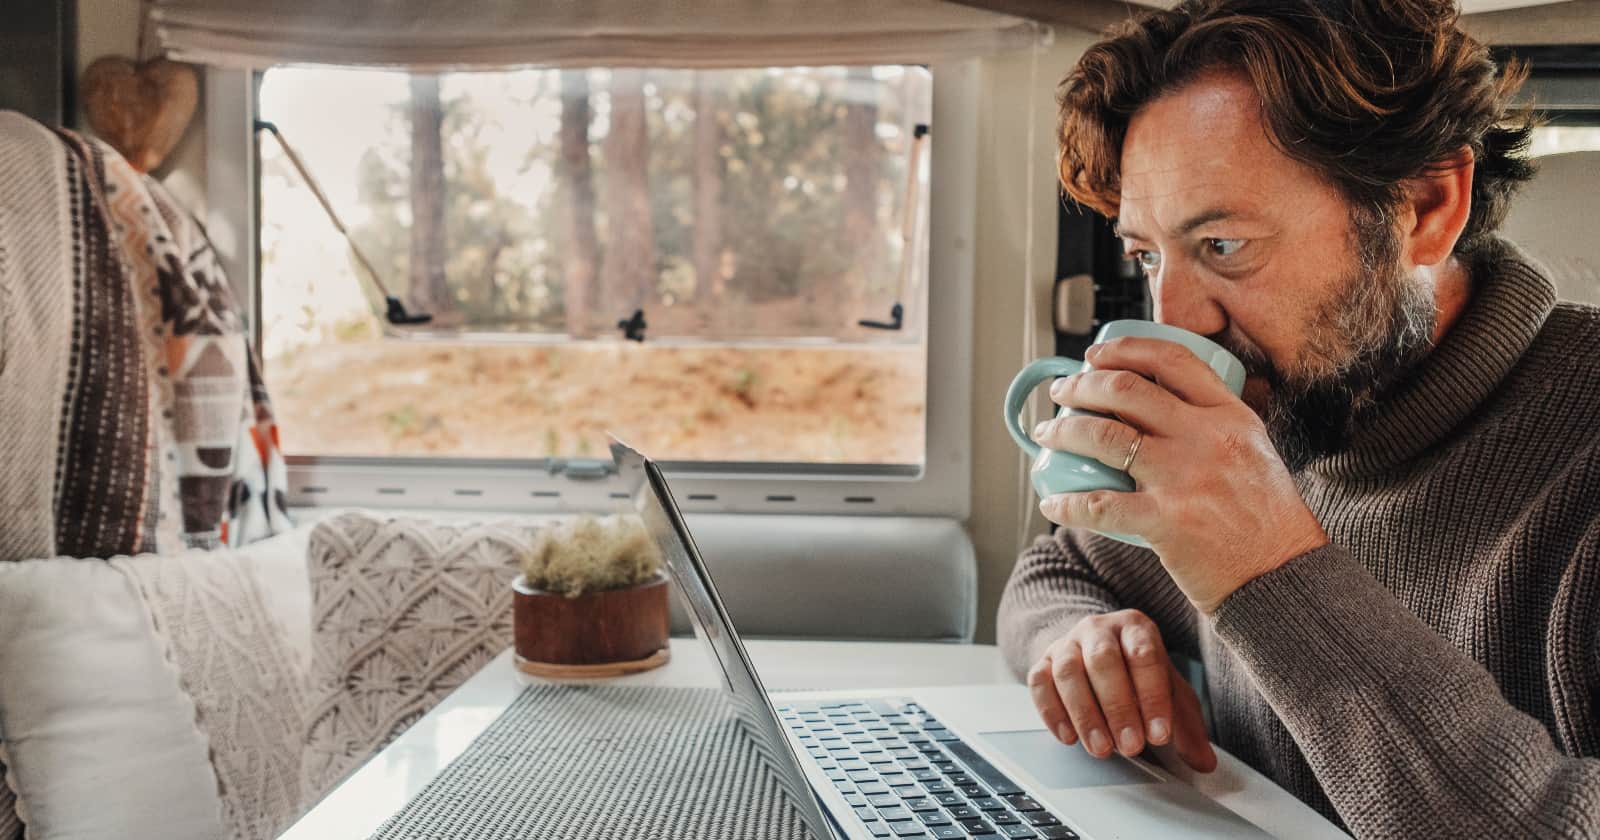 Mature man working on laptop computer inside a camper van with nature outdoors view outside the window. Van life offers the flexibility of a remote work schedule.